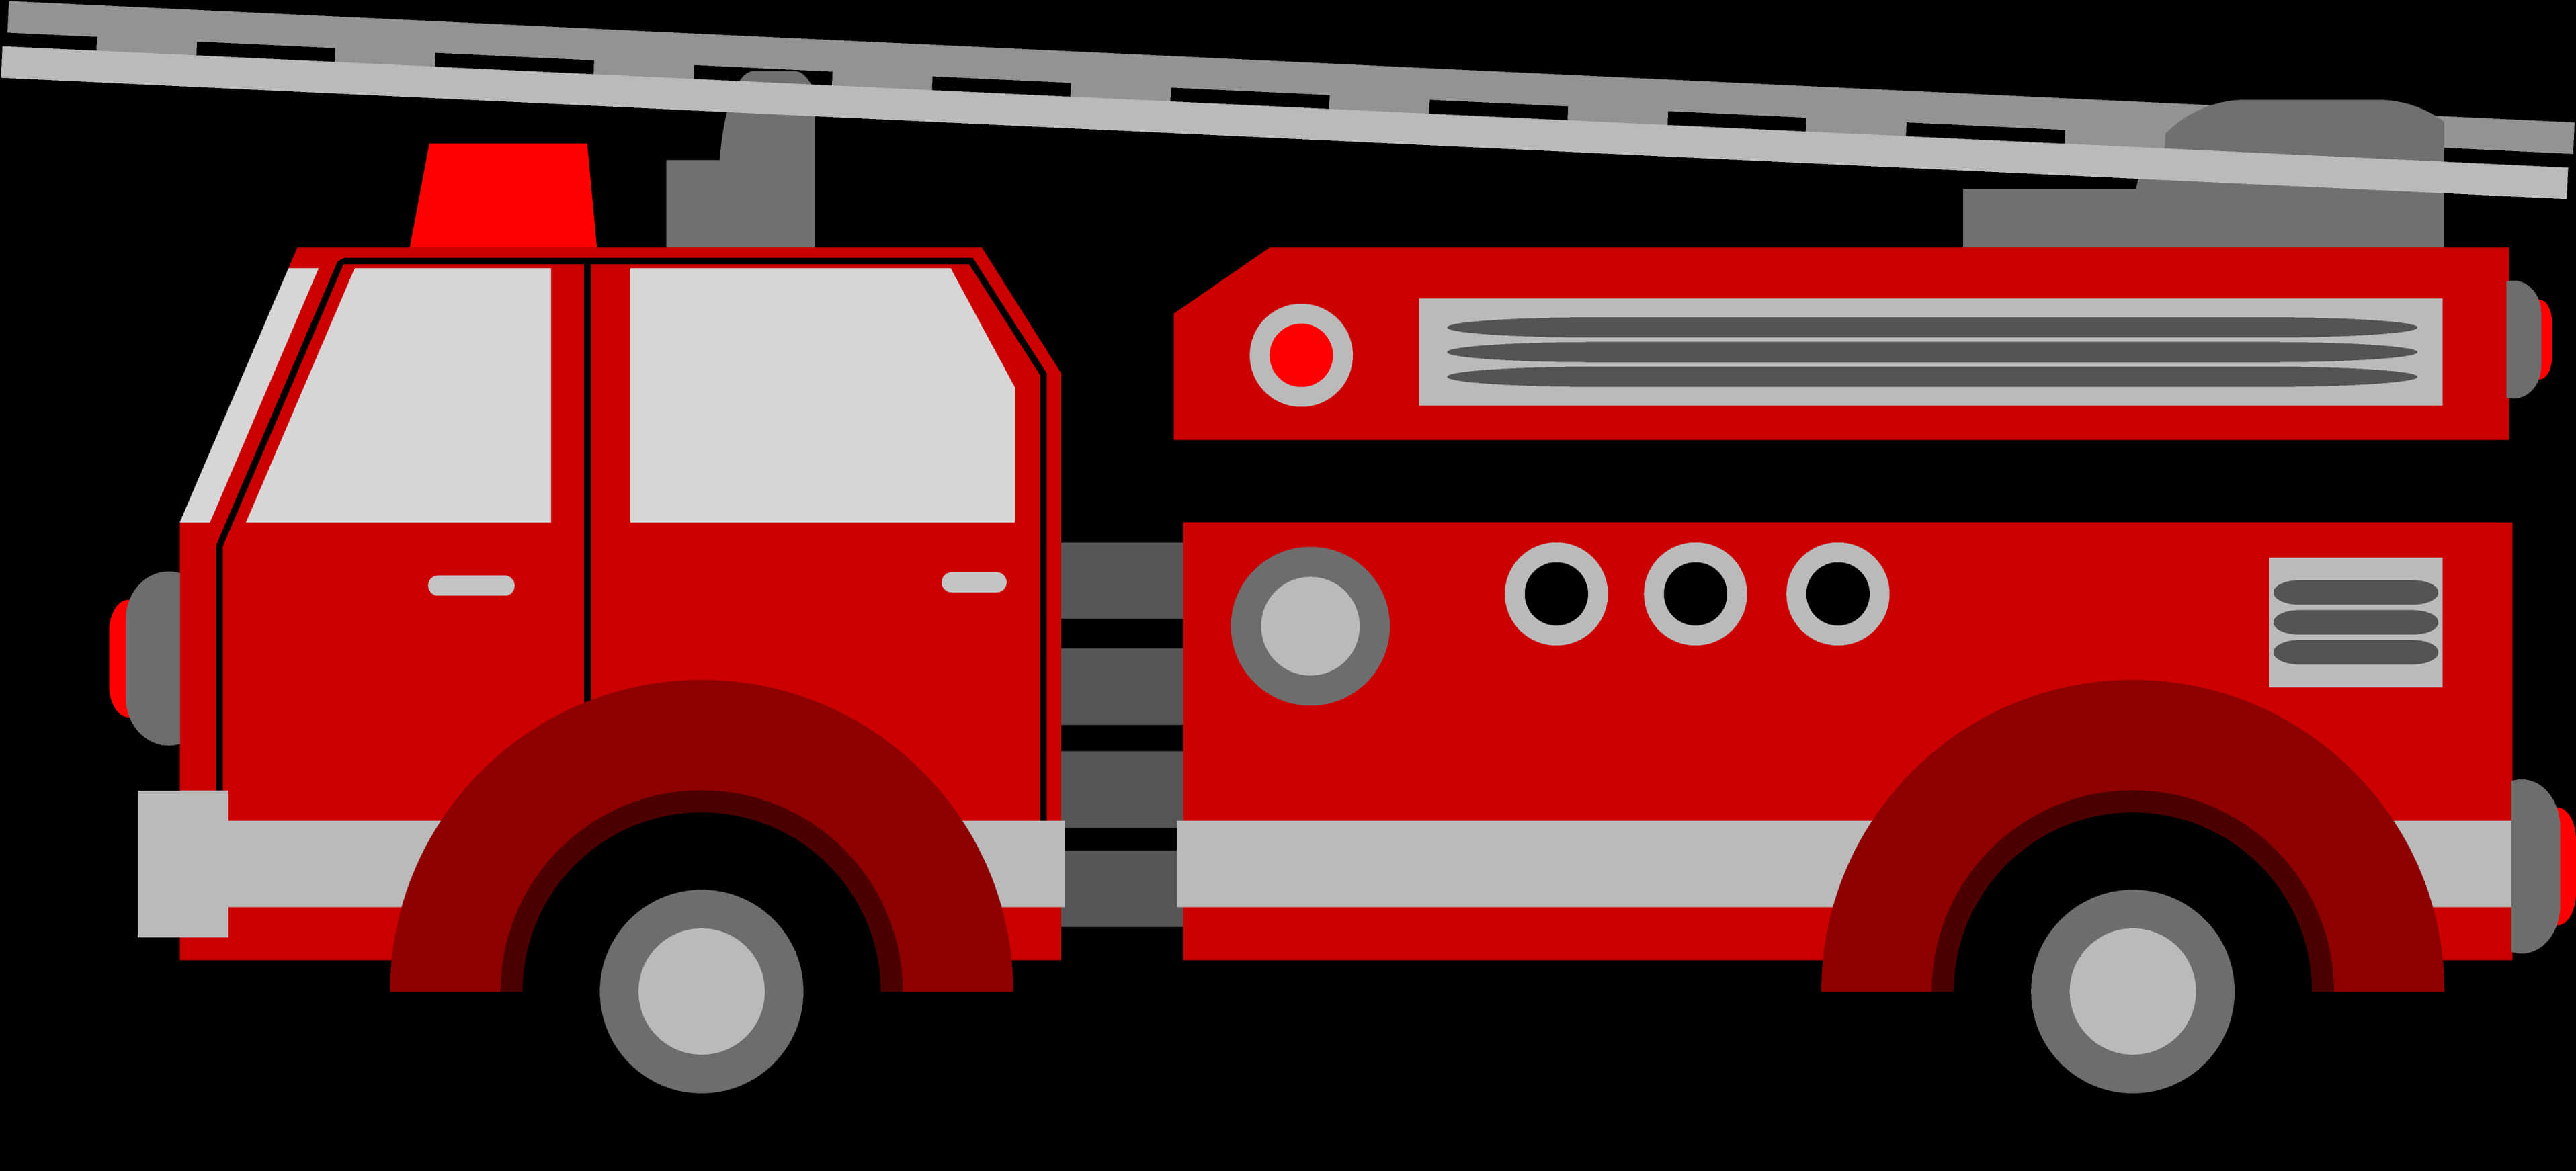 A Red And White Fire Truck